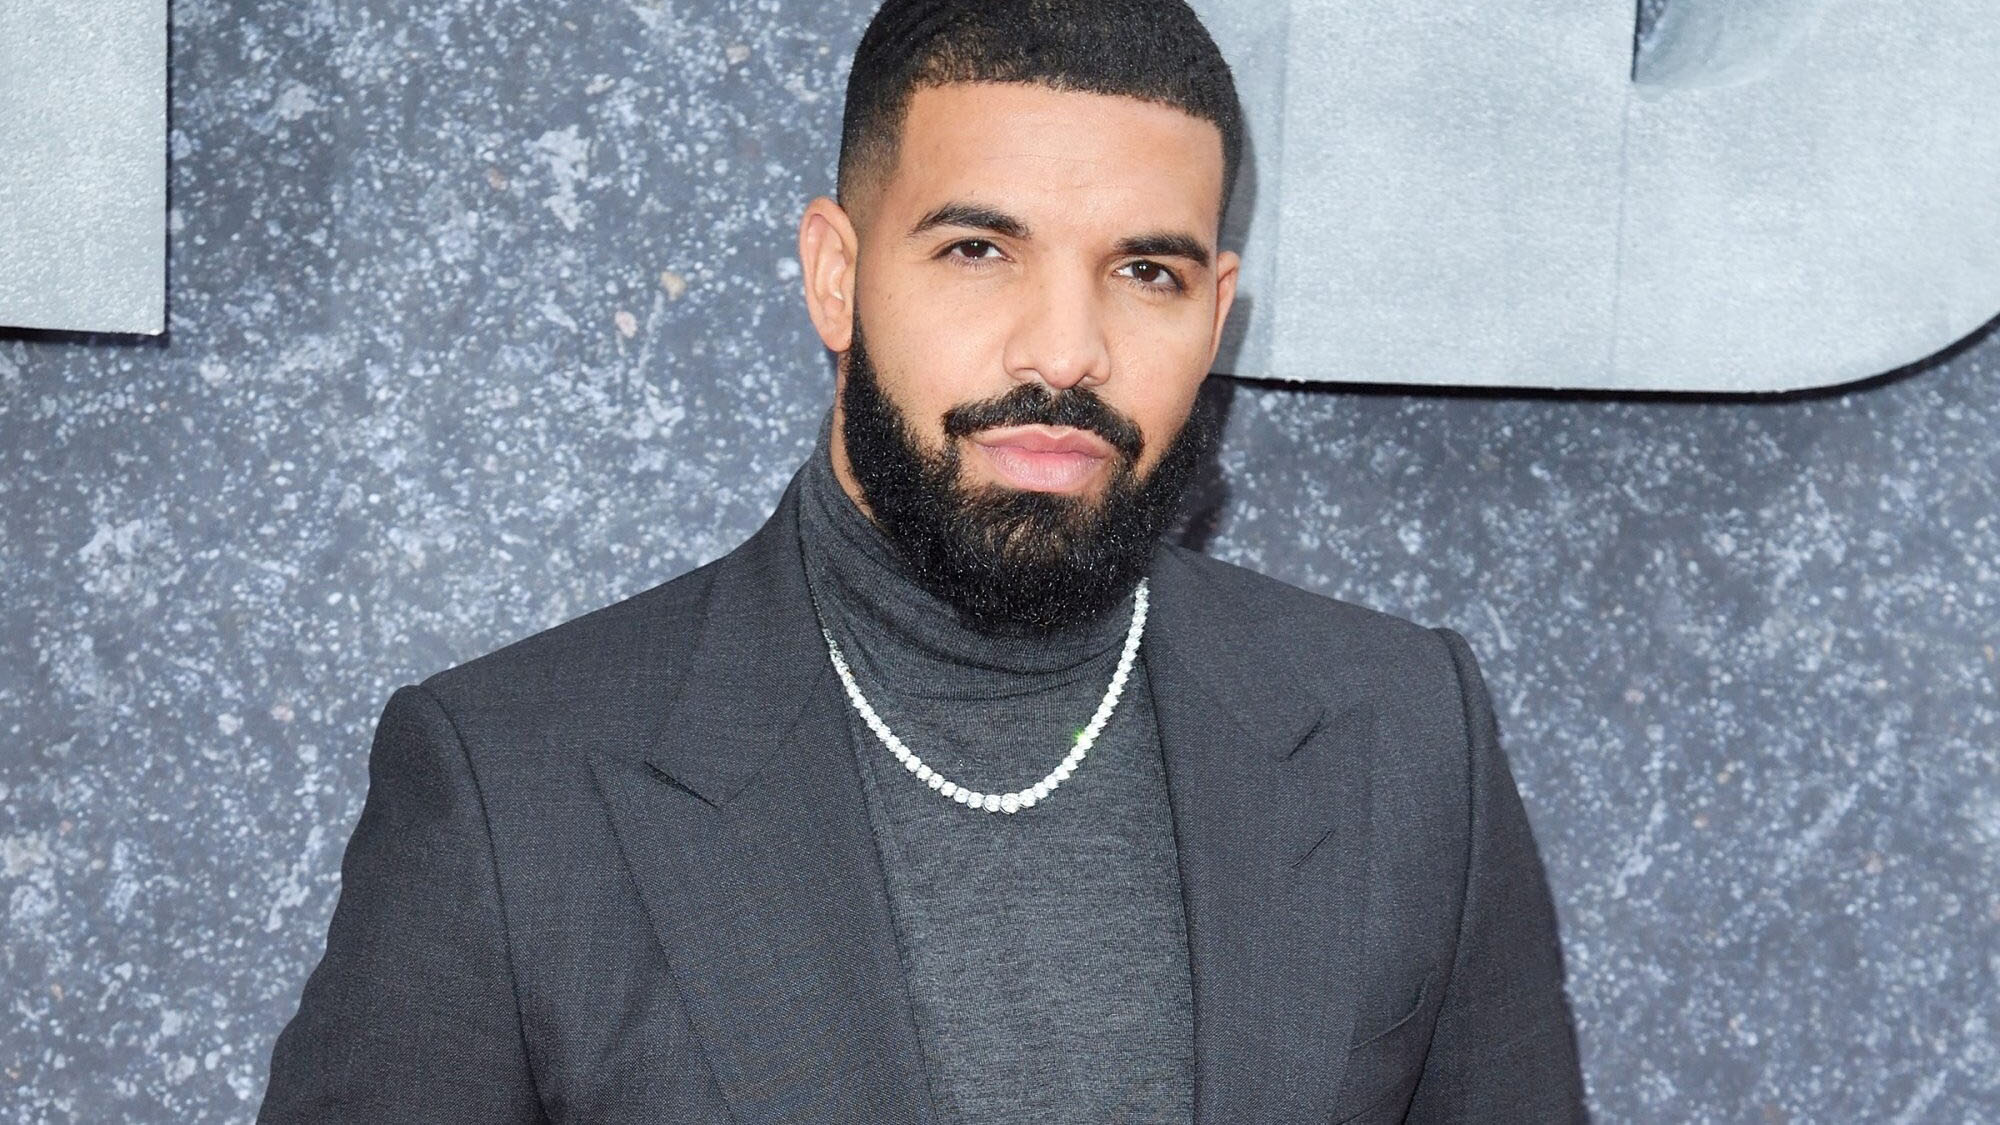 Aubrey Drake Graham (born October 24, 1986) is a Canadian rapper, singer, songwriter, actor, producer, and entrepreneur. Gaining recognition by starri...